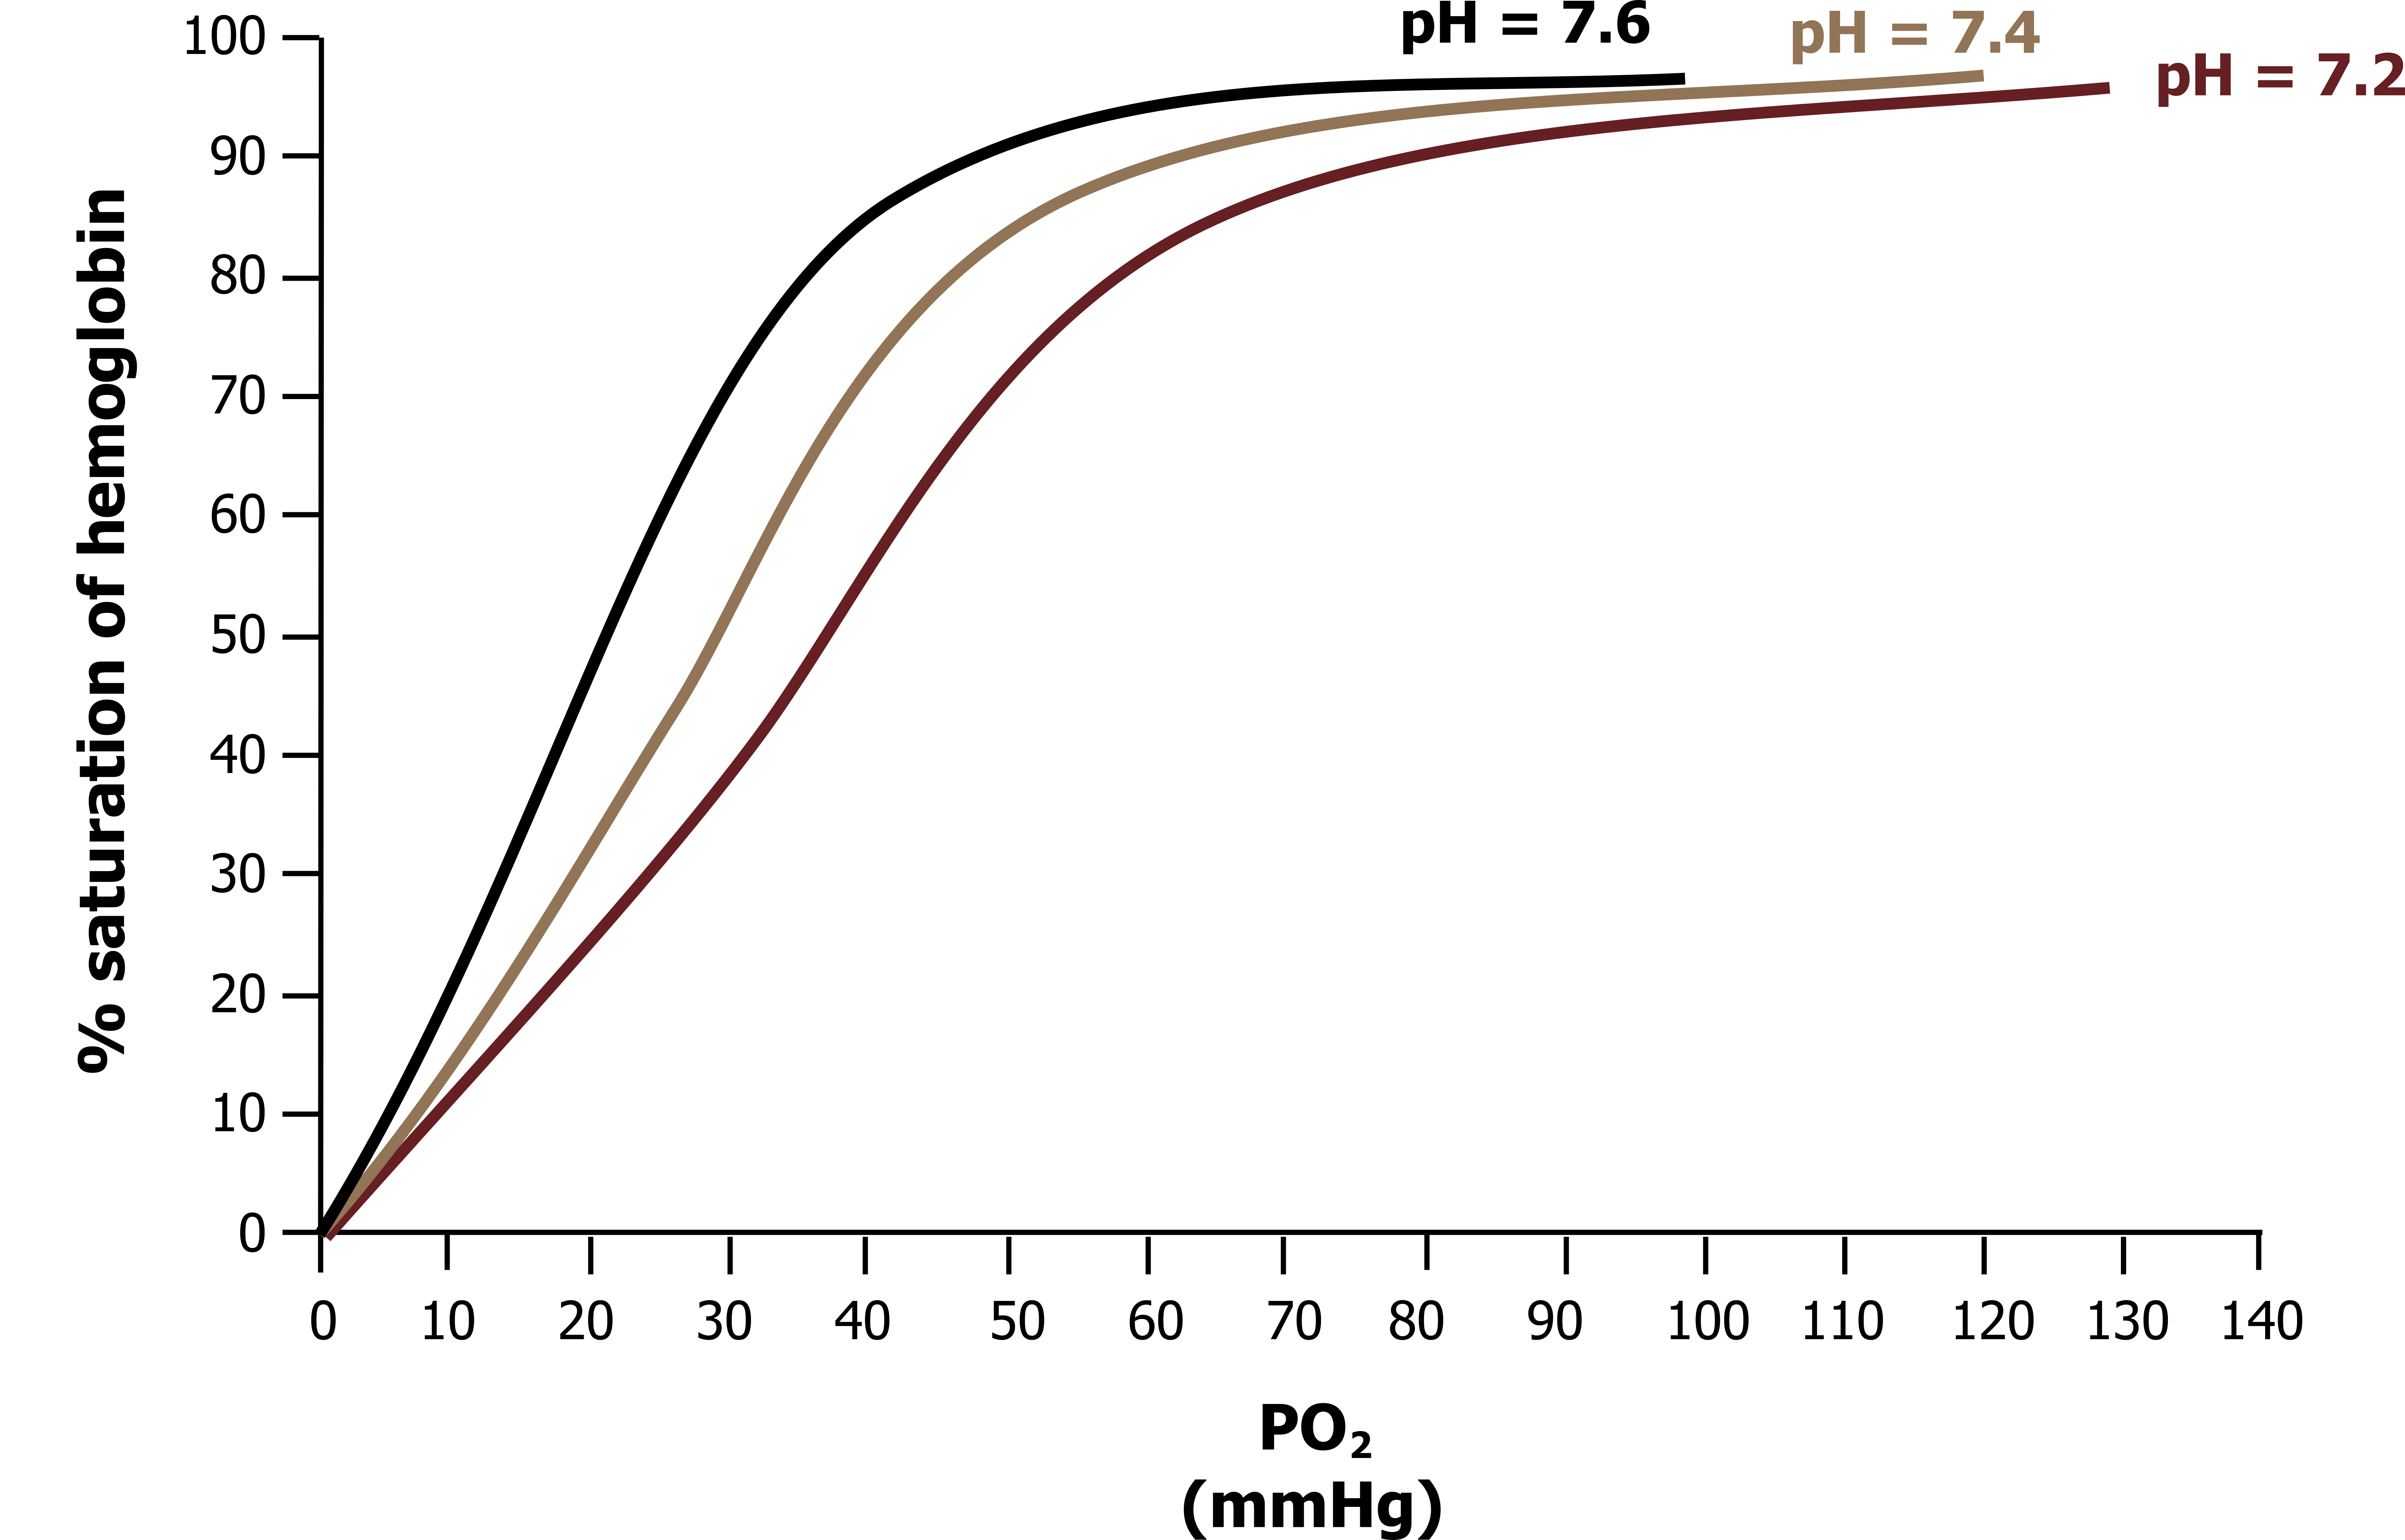 Graph with y-axis labeled % saturation of hemoglobin ranging from 0 to 100 and x-axis labeled P O2 (mmHg) ranging from 0 to 140. Oxyhemoglobin dissociation at 38℃. 3 curves labeled with different pH values, all beginning at (0,0). 7.6 ends at (95, 98). 7.4 ends at (118, 96). 7.2 ends at (130, 96). All values are approximate.